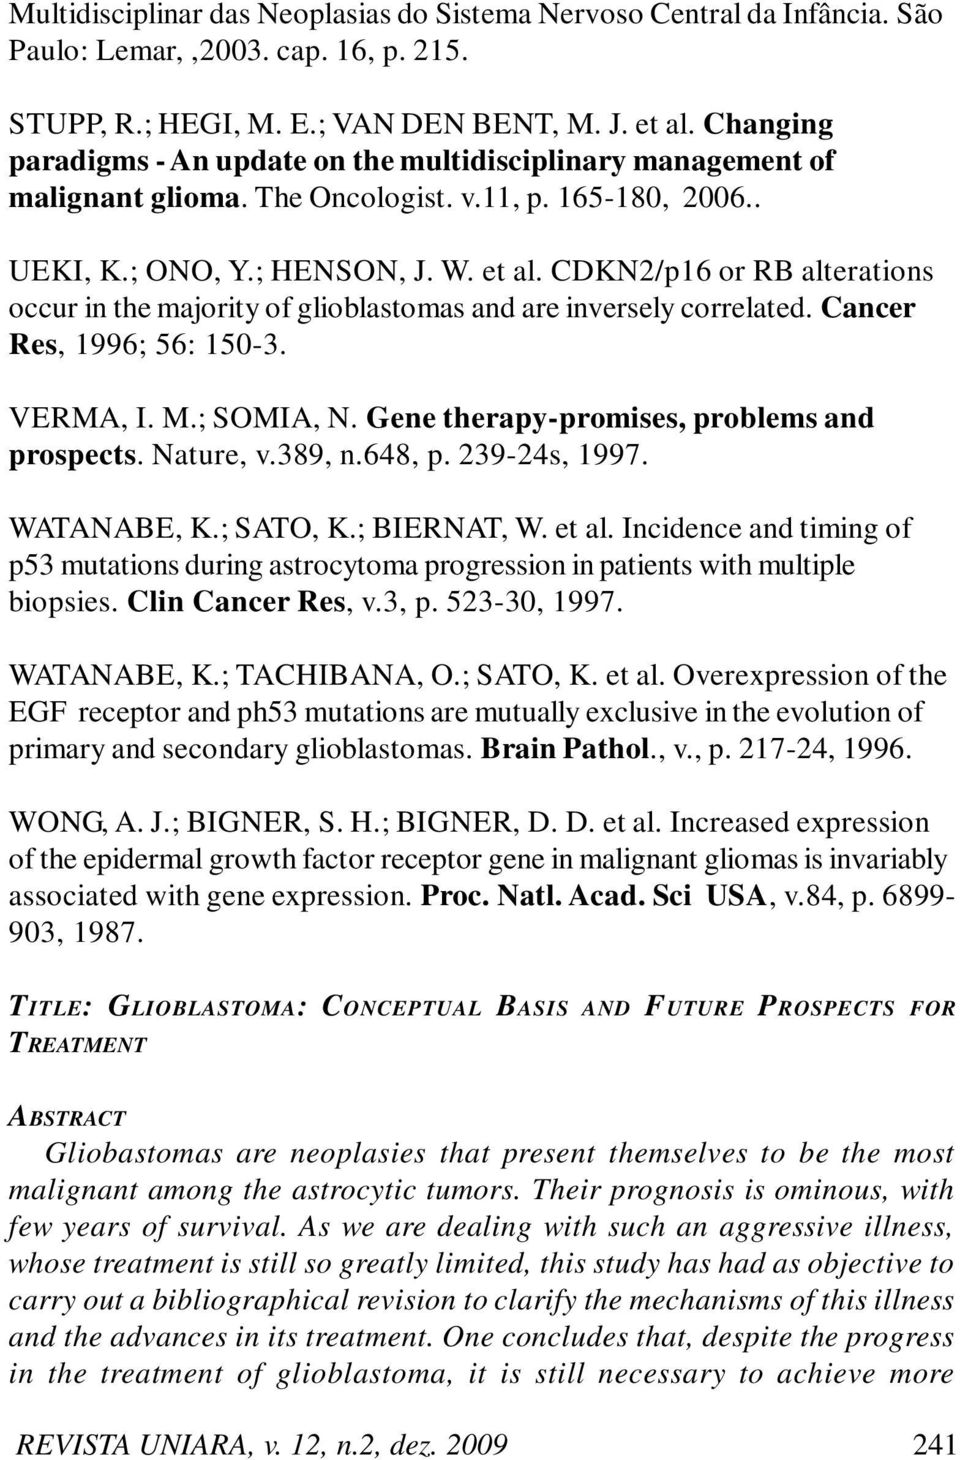 CDKN2/p16 or RB alterations occur in the majority of glioblastomas and are inversely correlated. Cancer Res, 1996; 56: 150-3. VERMA, I. M.; SOMIA, N. Gene therapy-promises, problems and prospects.